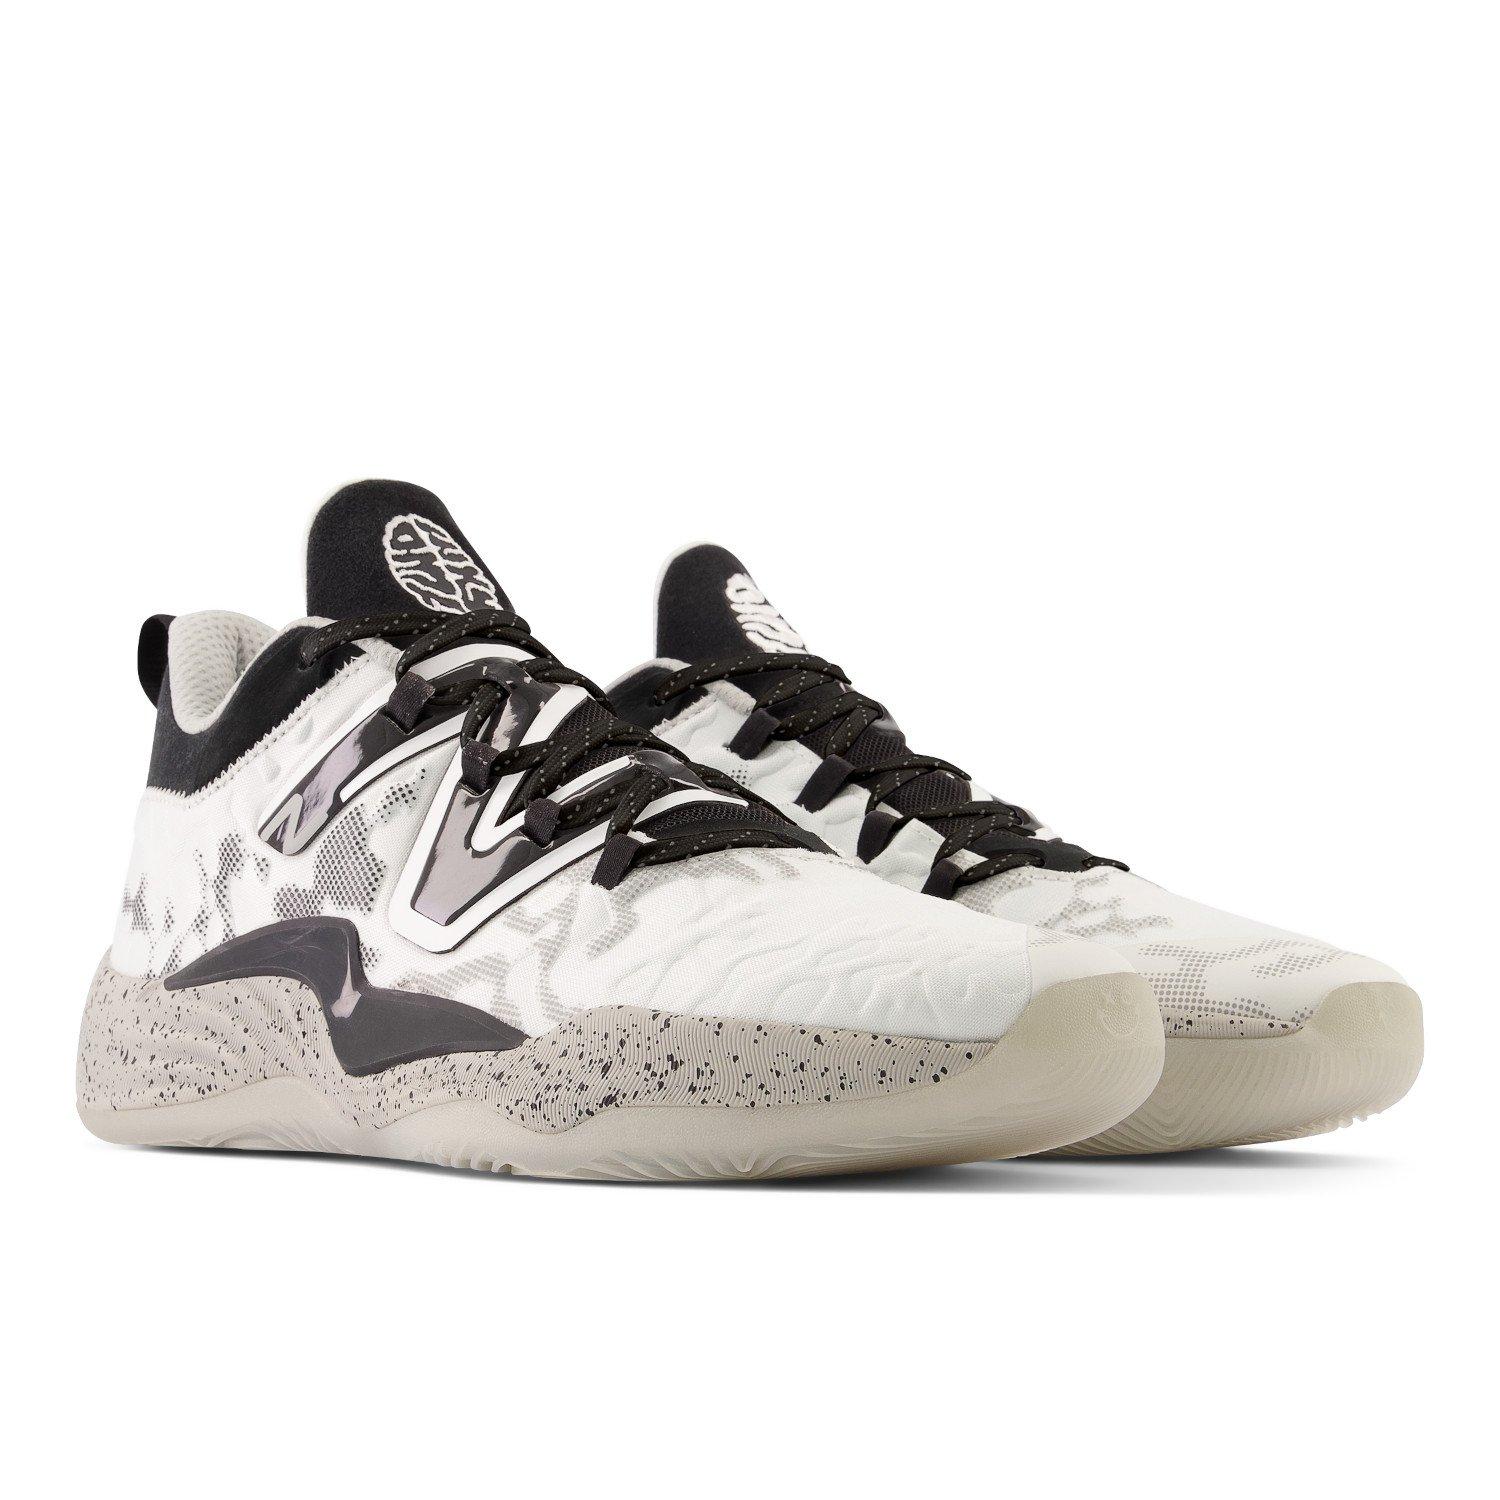 Men's TWO WXY v3 Basketball Shoe from New Balance | Team